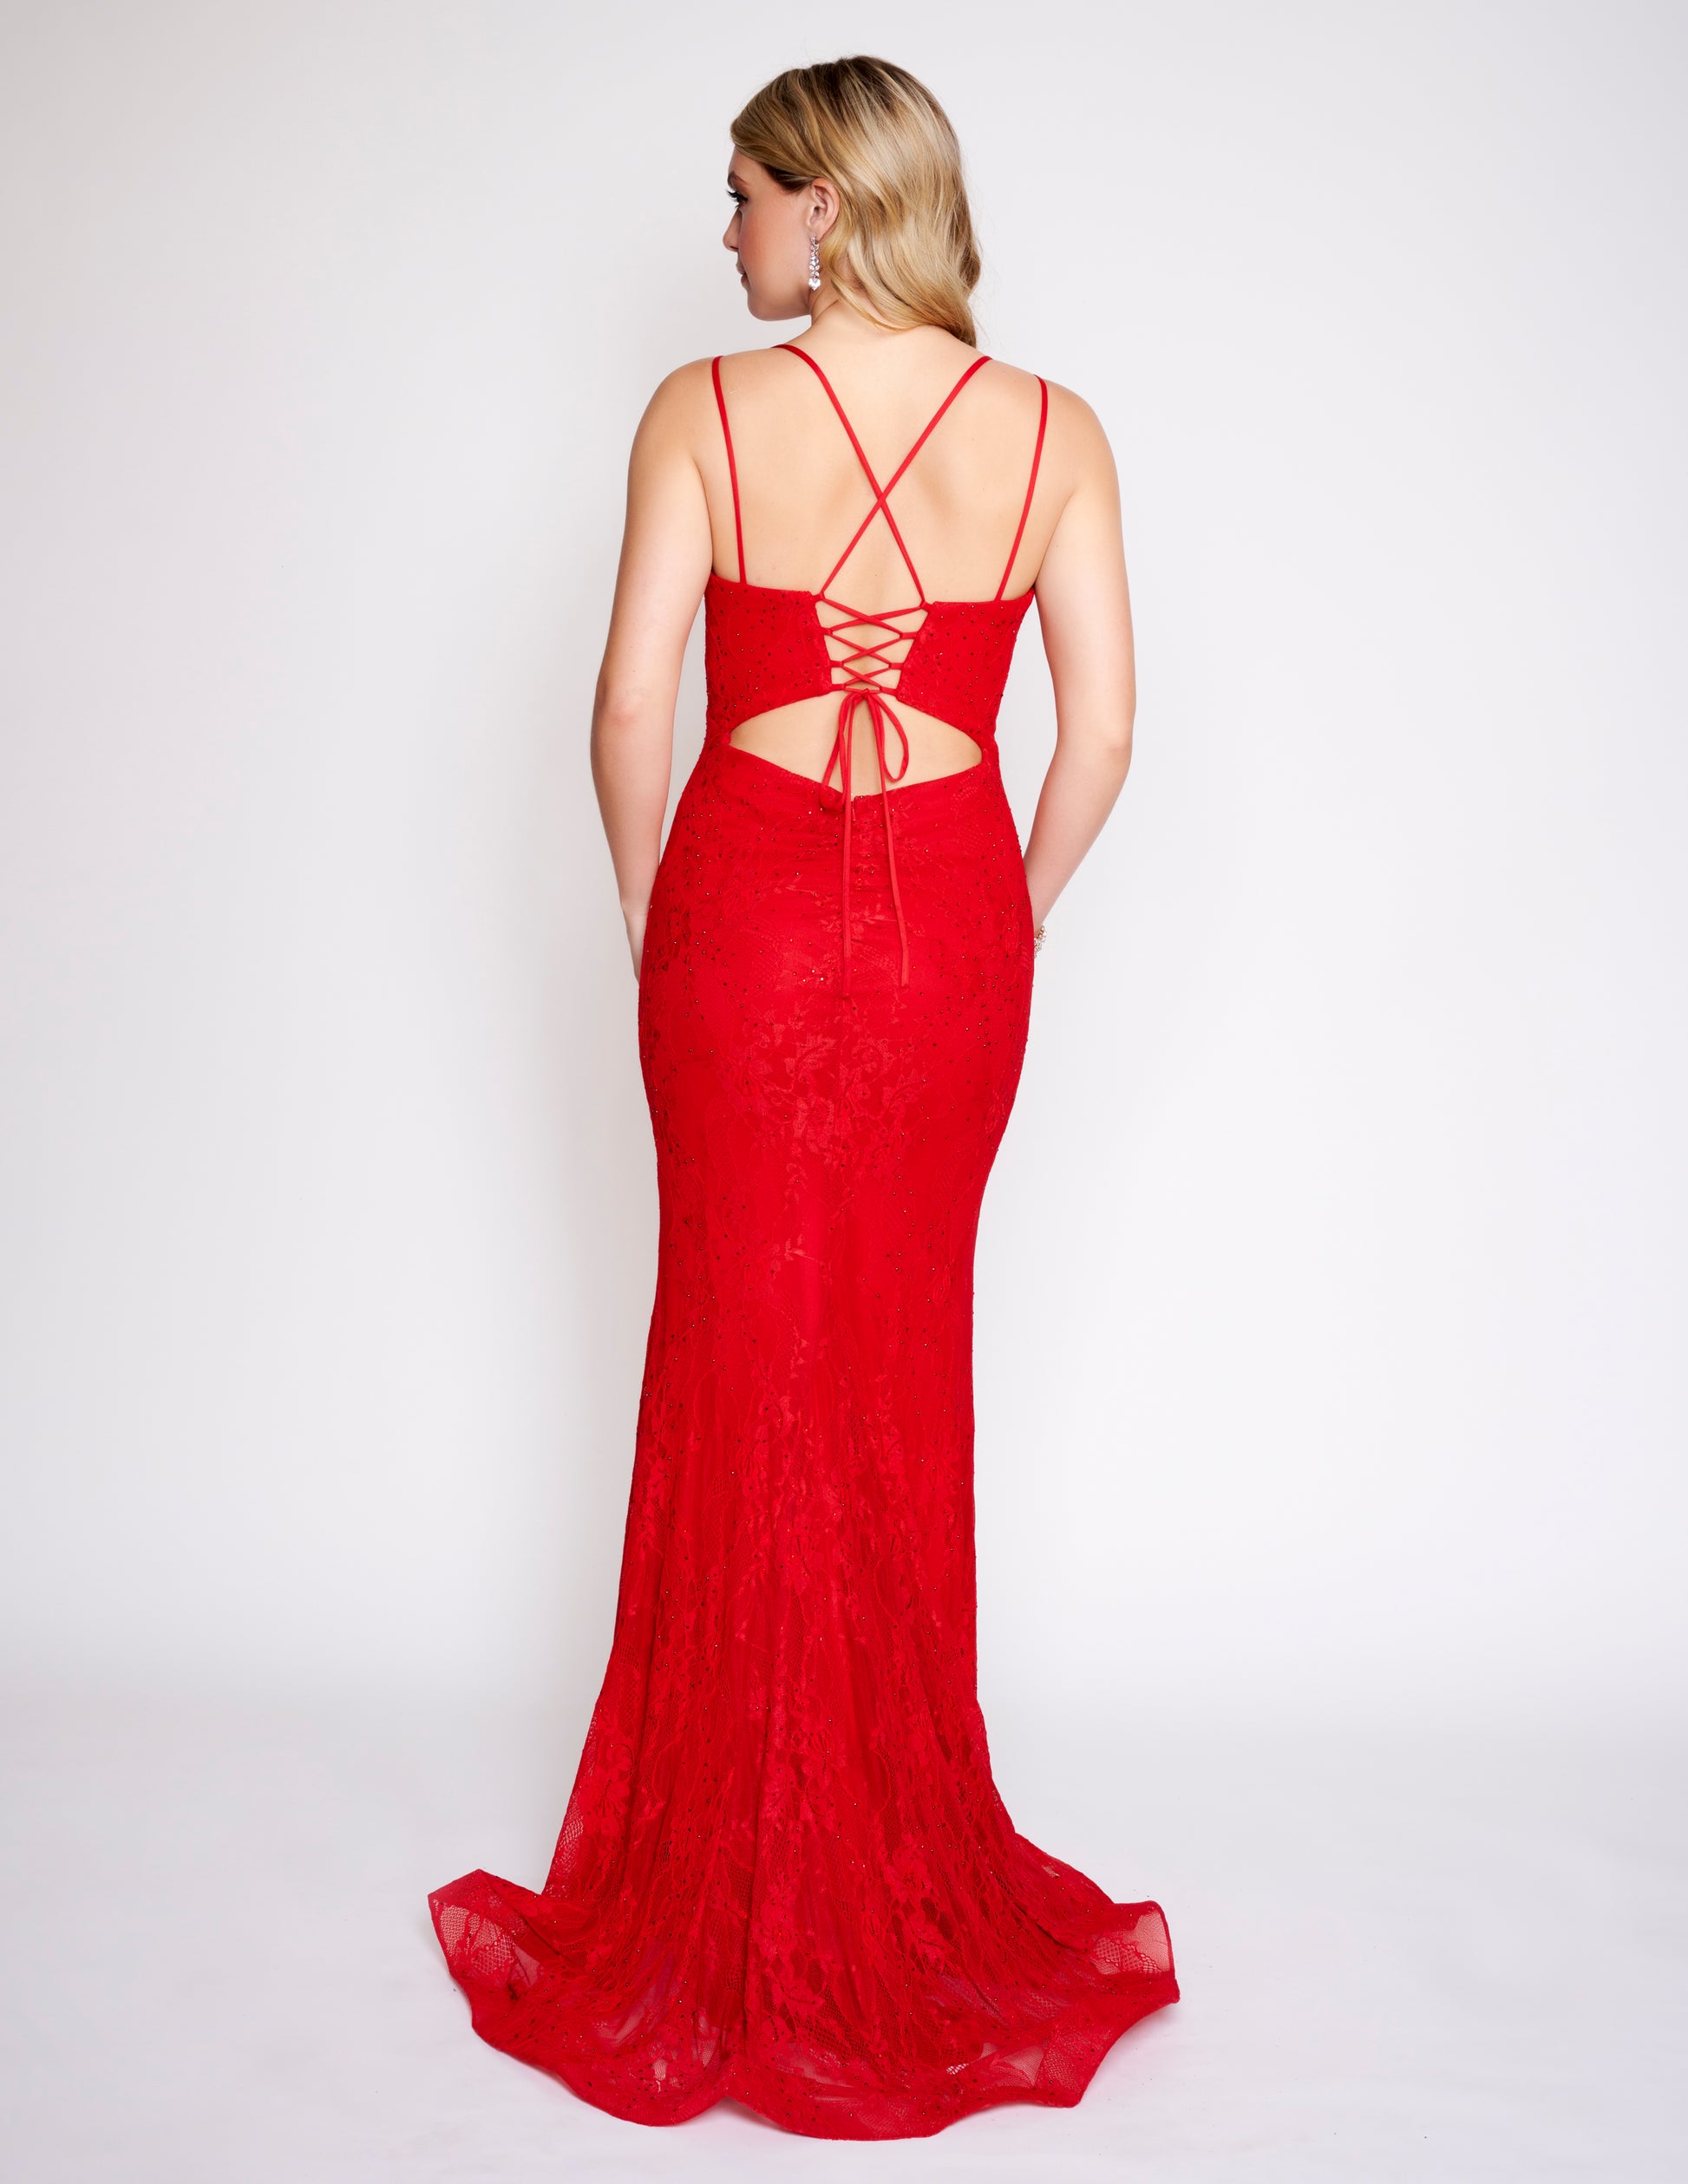 Nina Canacci 7509 Long Lace Prom Dress with a Cutout Corset Back fit and flare style with slit